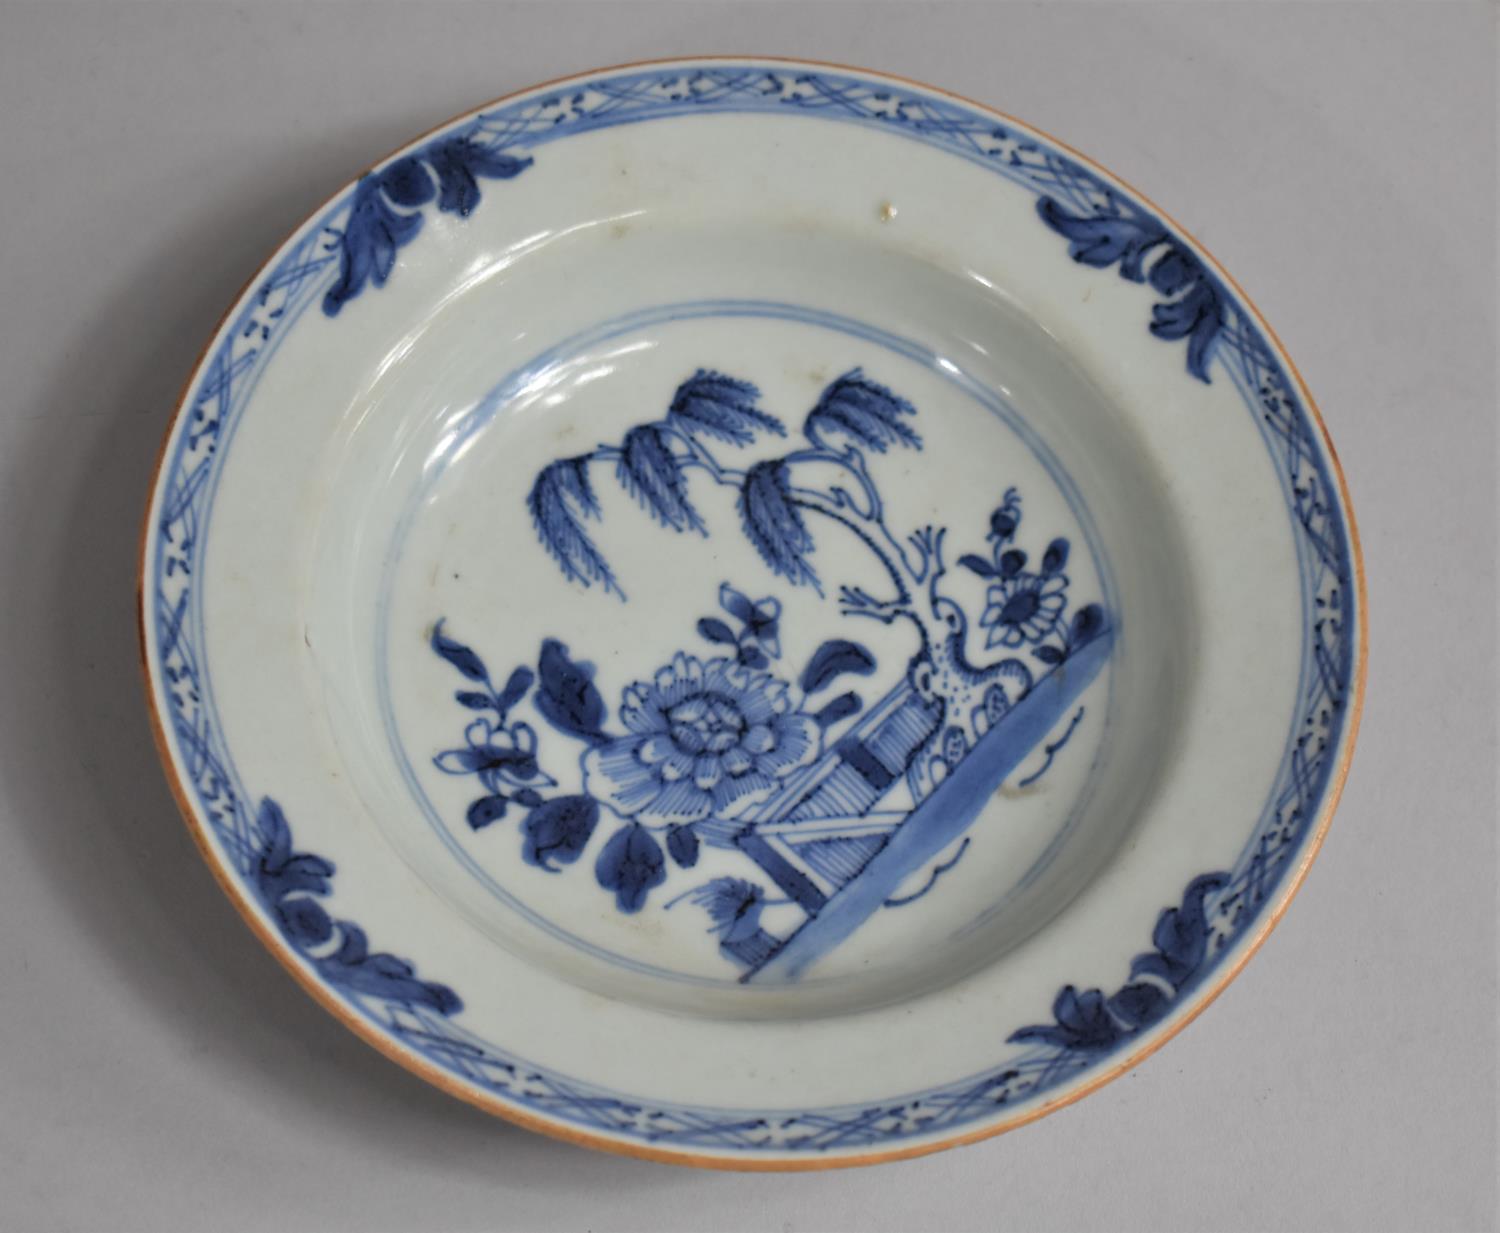 An 18th/19th Century Chinese Porcelain Dish Decorated with Willow Tree and Blooming Flower in Walled - Image 2 of 3